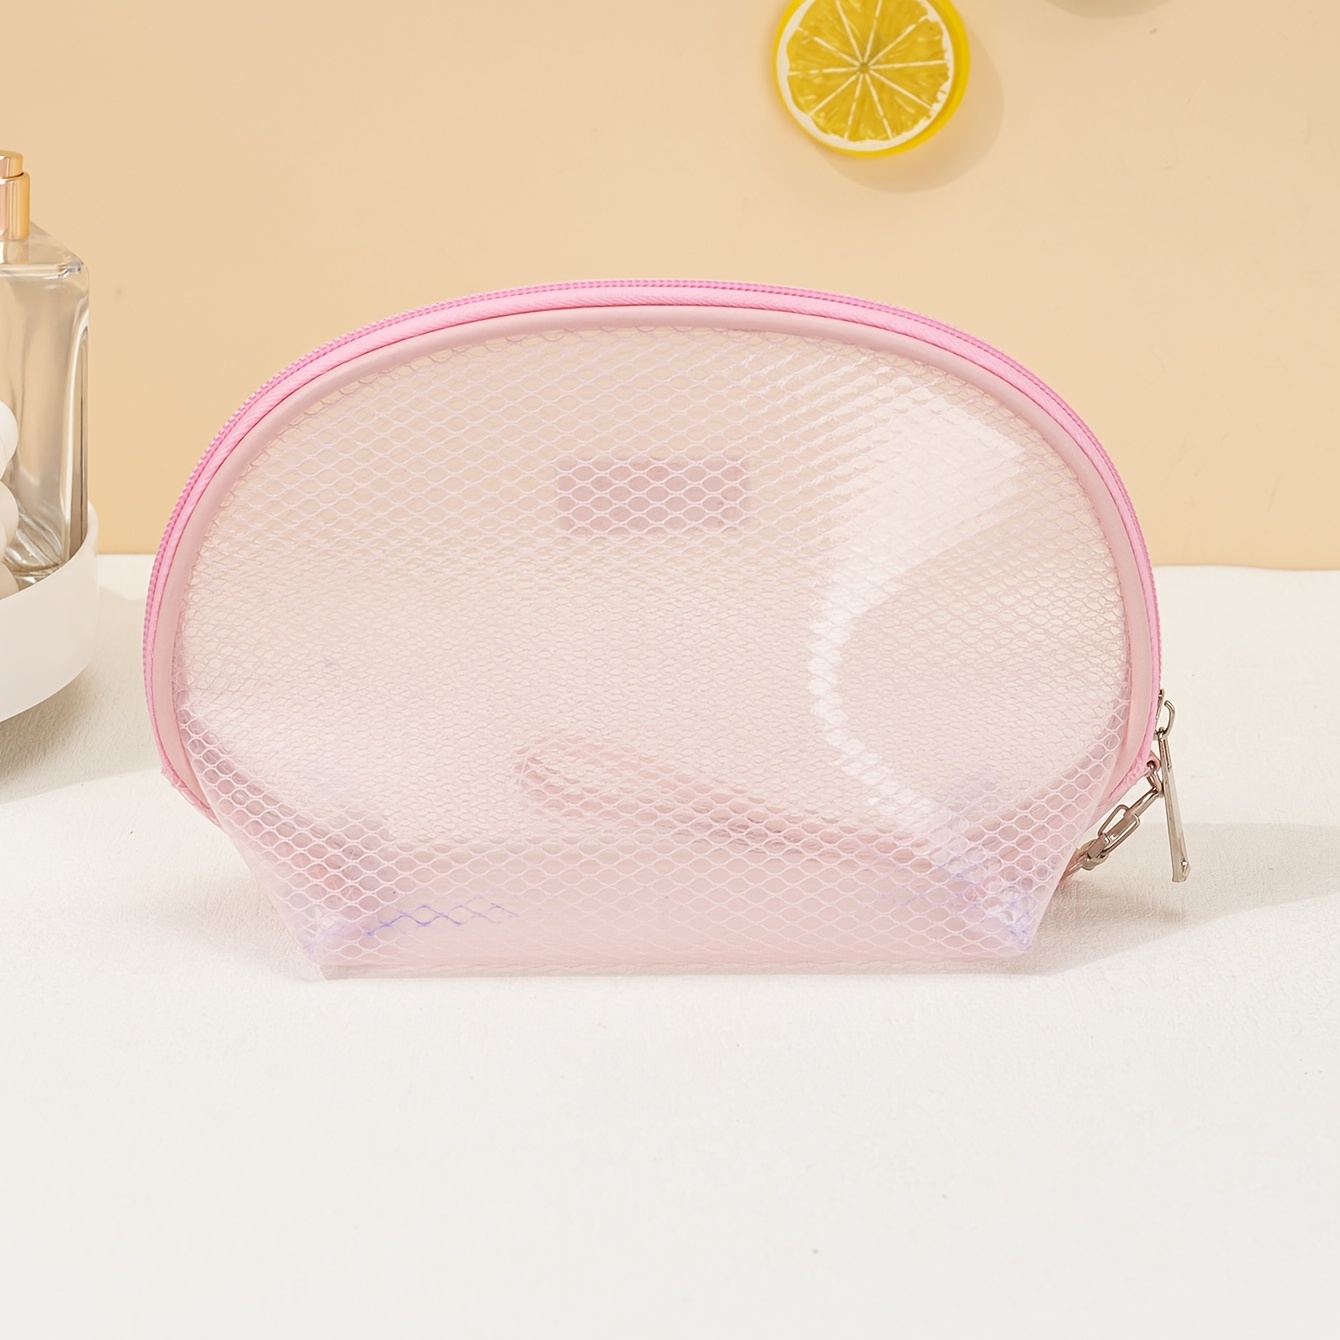 Mesh Makeup Bags for Women - Mesh Zipper Bags for Travel Cosmetic Bag  Makeup Bag for Purse Pouch Mesh Cosmetic Bag Mesh Zipper Pouch Portable  Travel